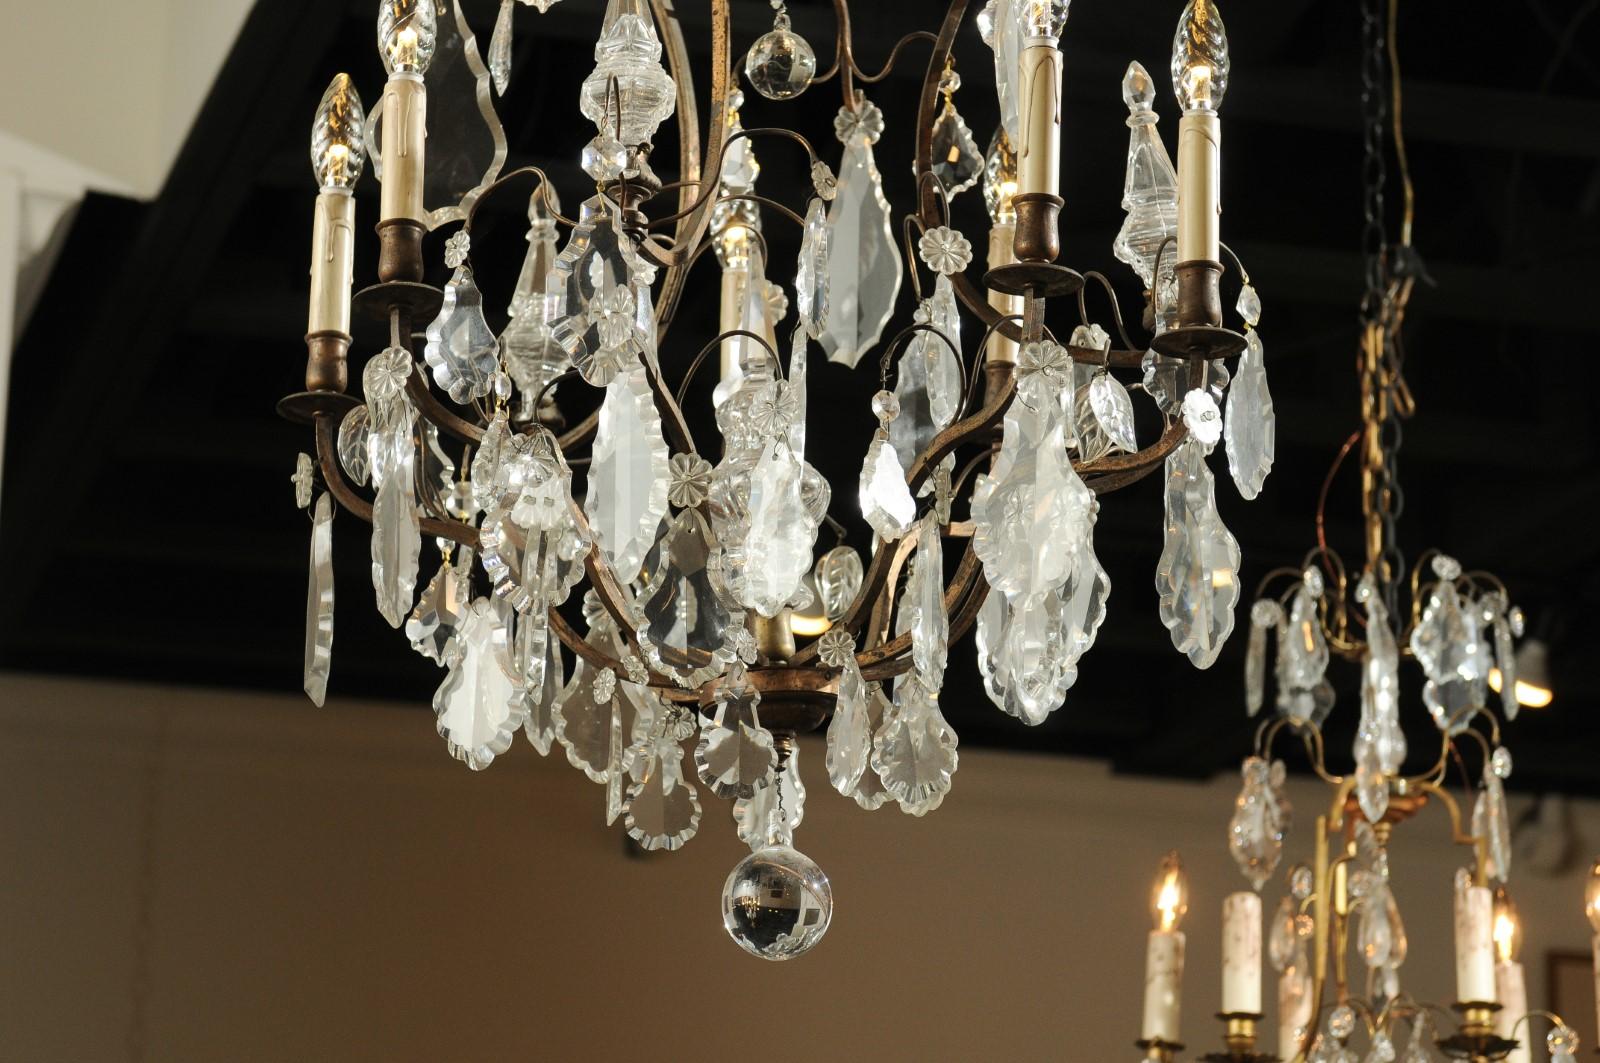 Belle Époque French Six-Light Crystal and Iron Chandelier with Obelisks, Late 19th Century For Sale